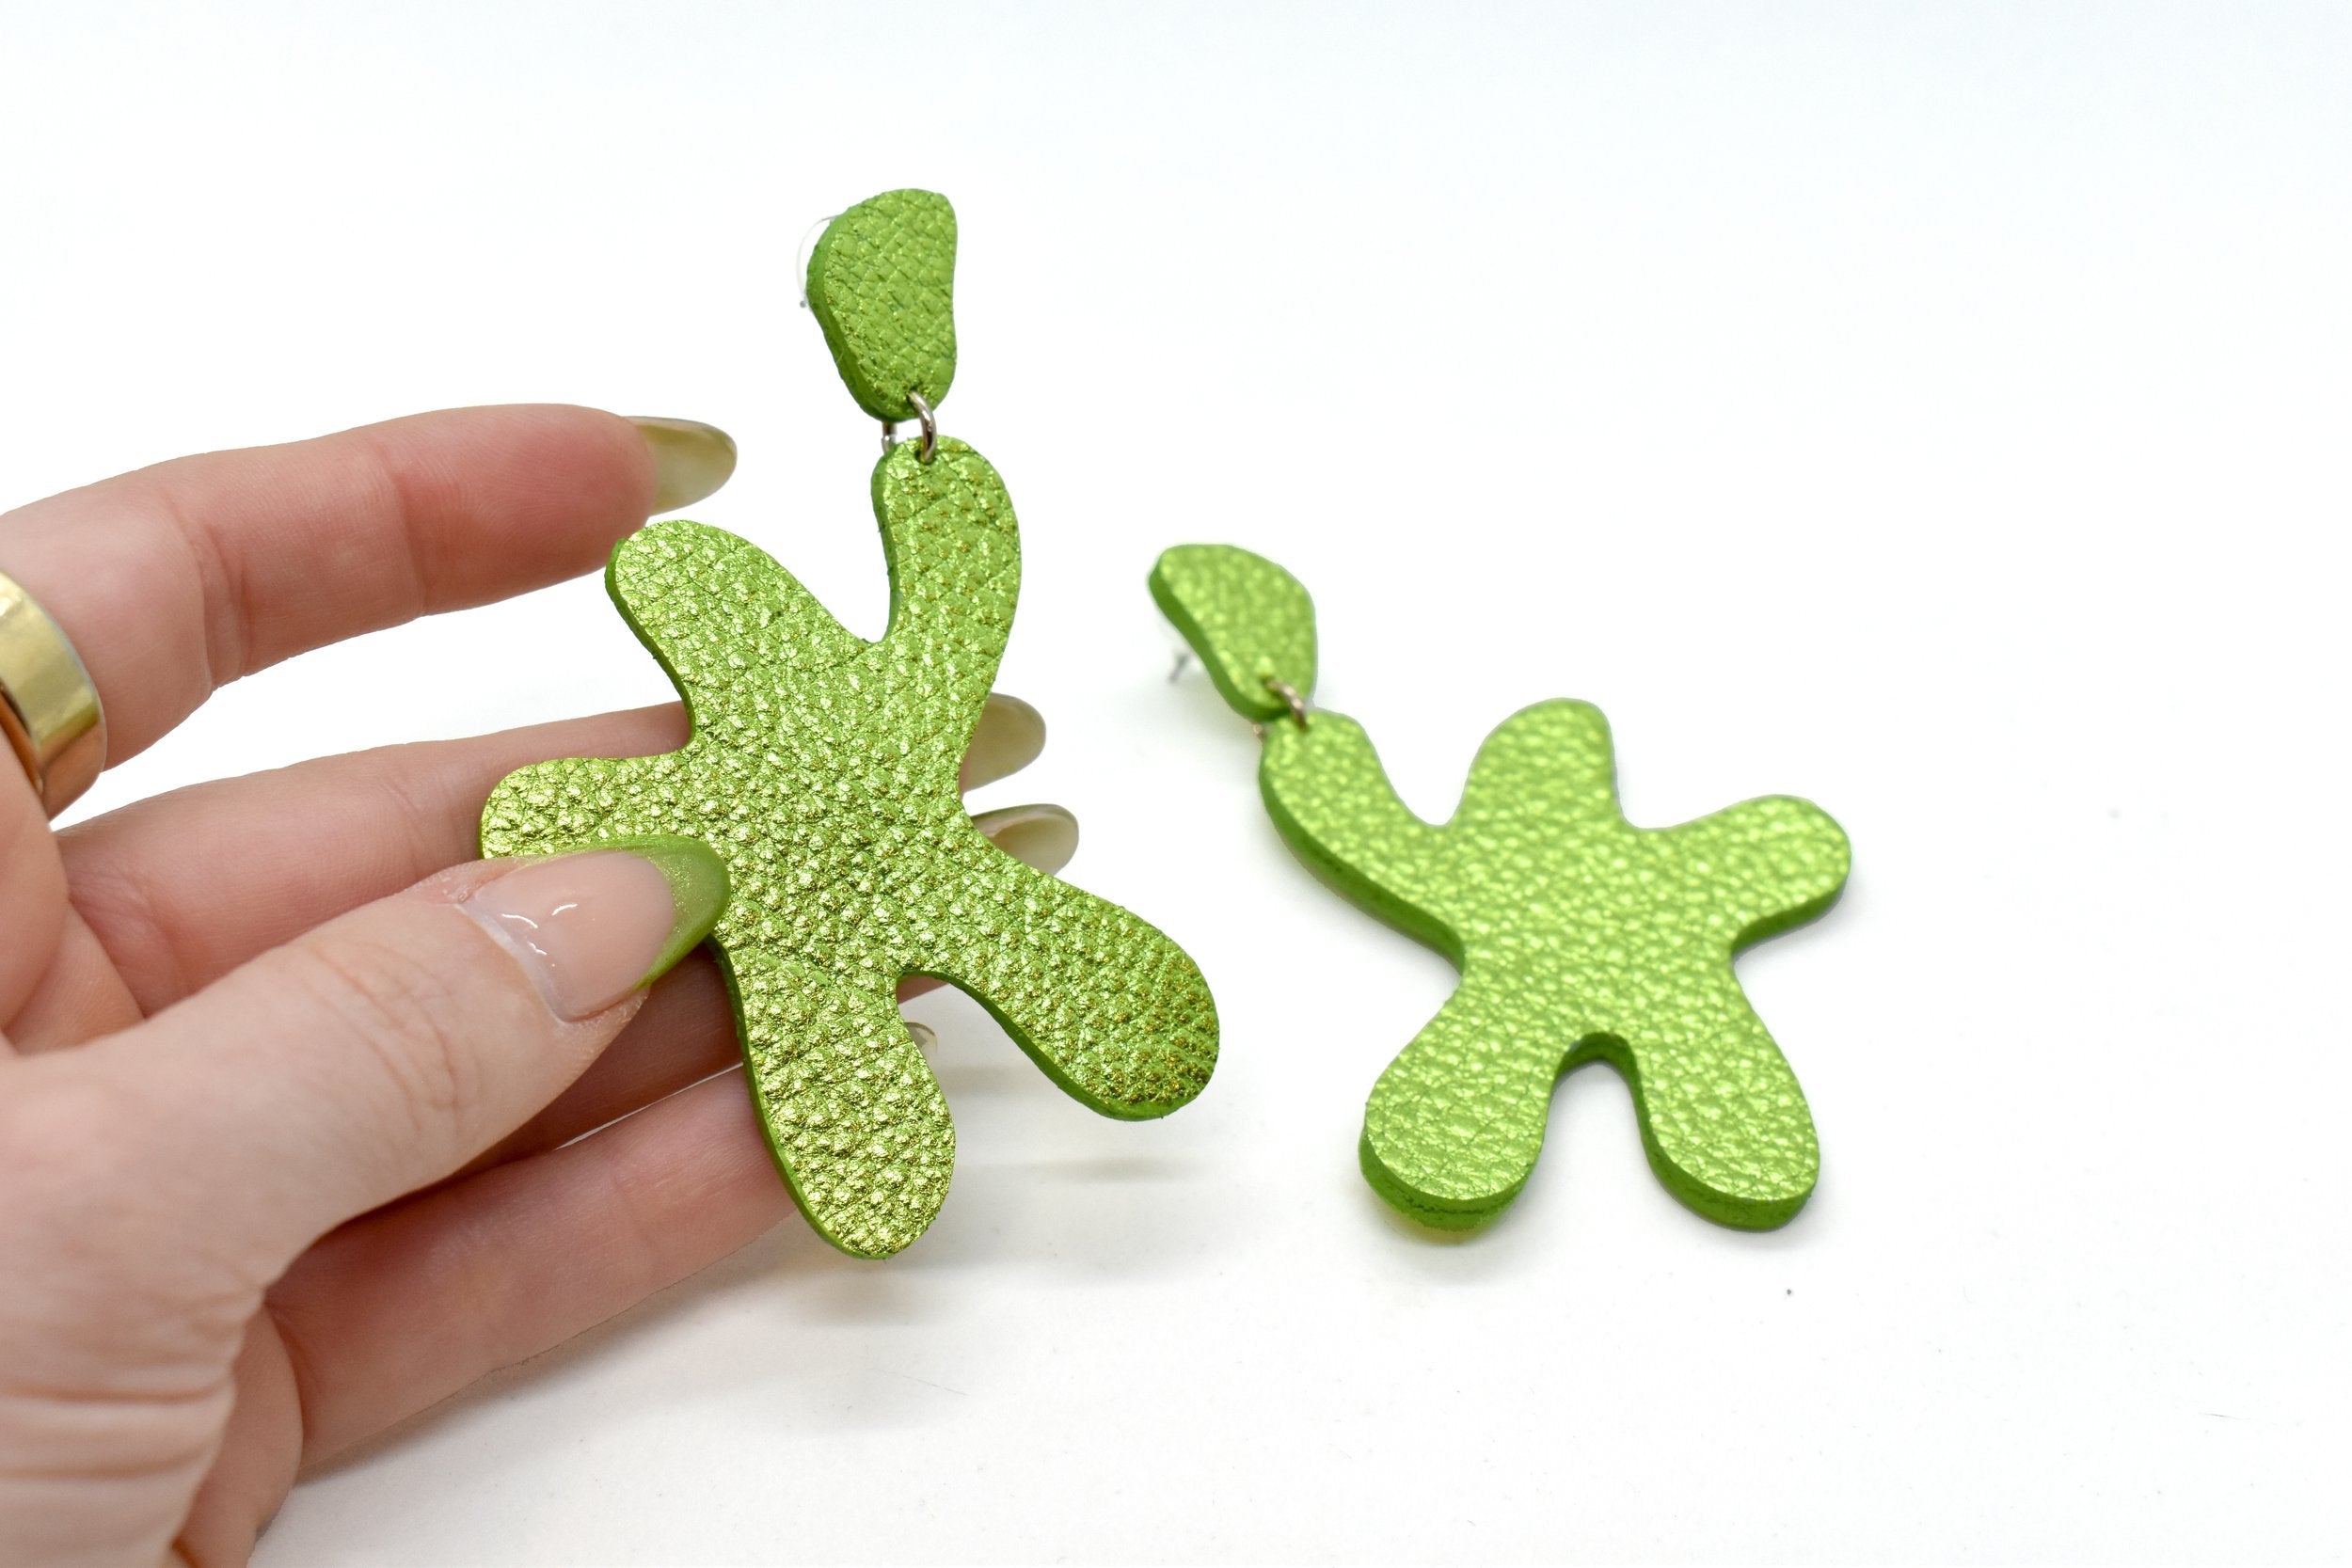 Hand holding Metallic Lime Leather Statement Earrings, Matisse Style Earrings in Lime Green